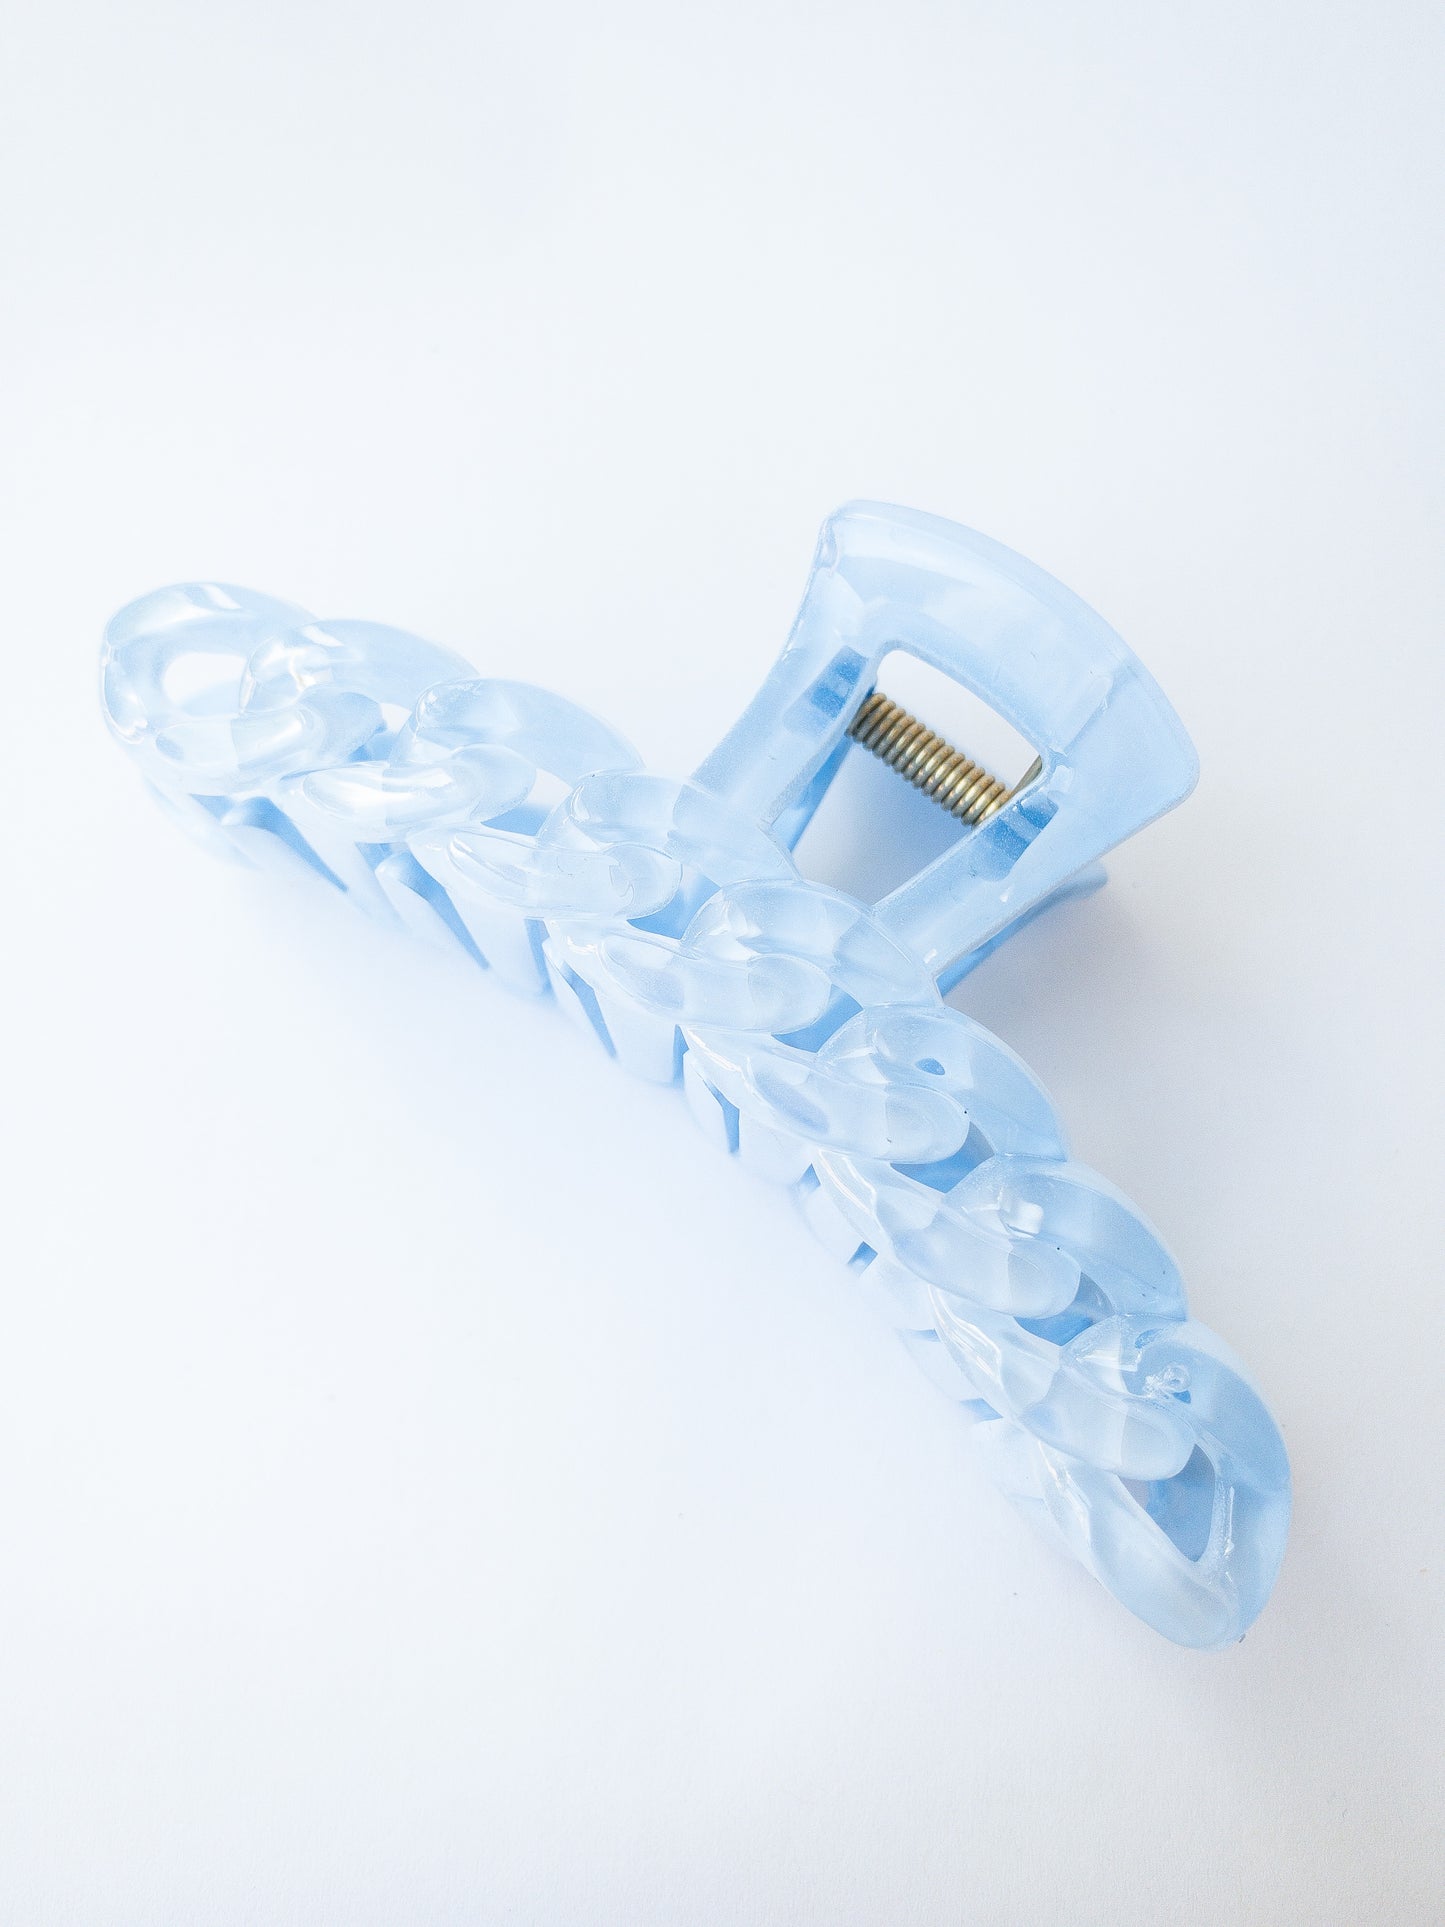 The brightest chain link hair claw clip in the most delectable candy hue! This blue hair claw is large in size and strong enough to sweep up your hair in a messy updo. You're going to want one in every color!